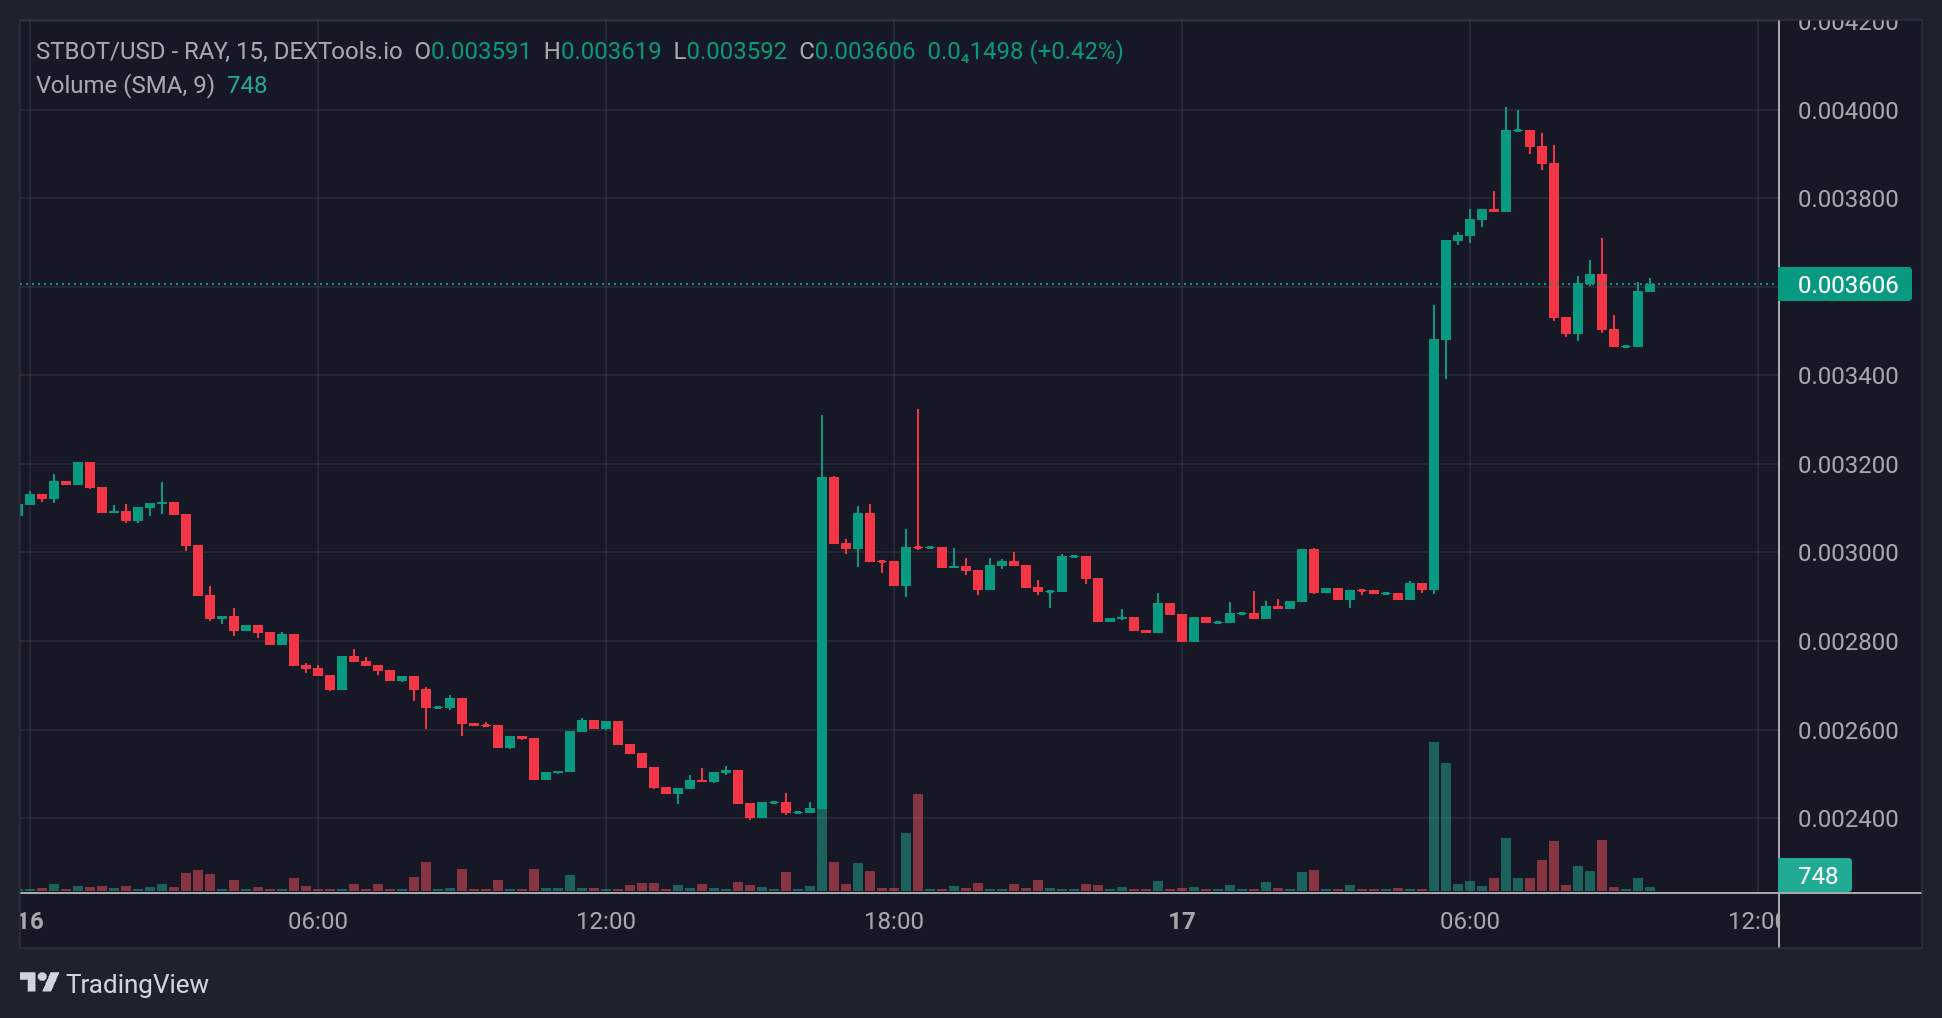 STBOT price chart